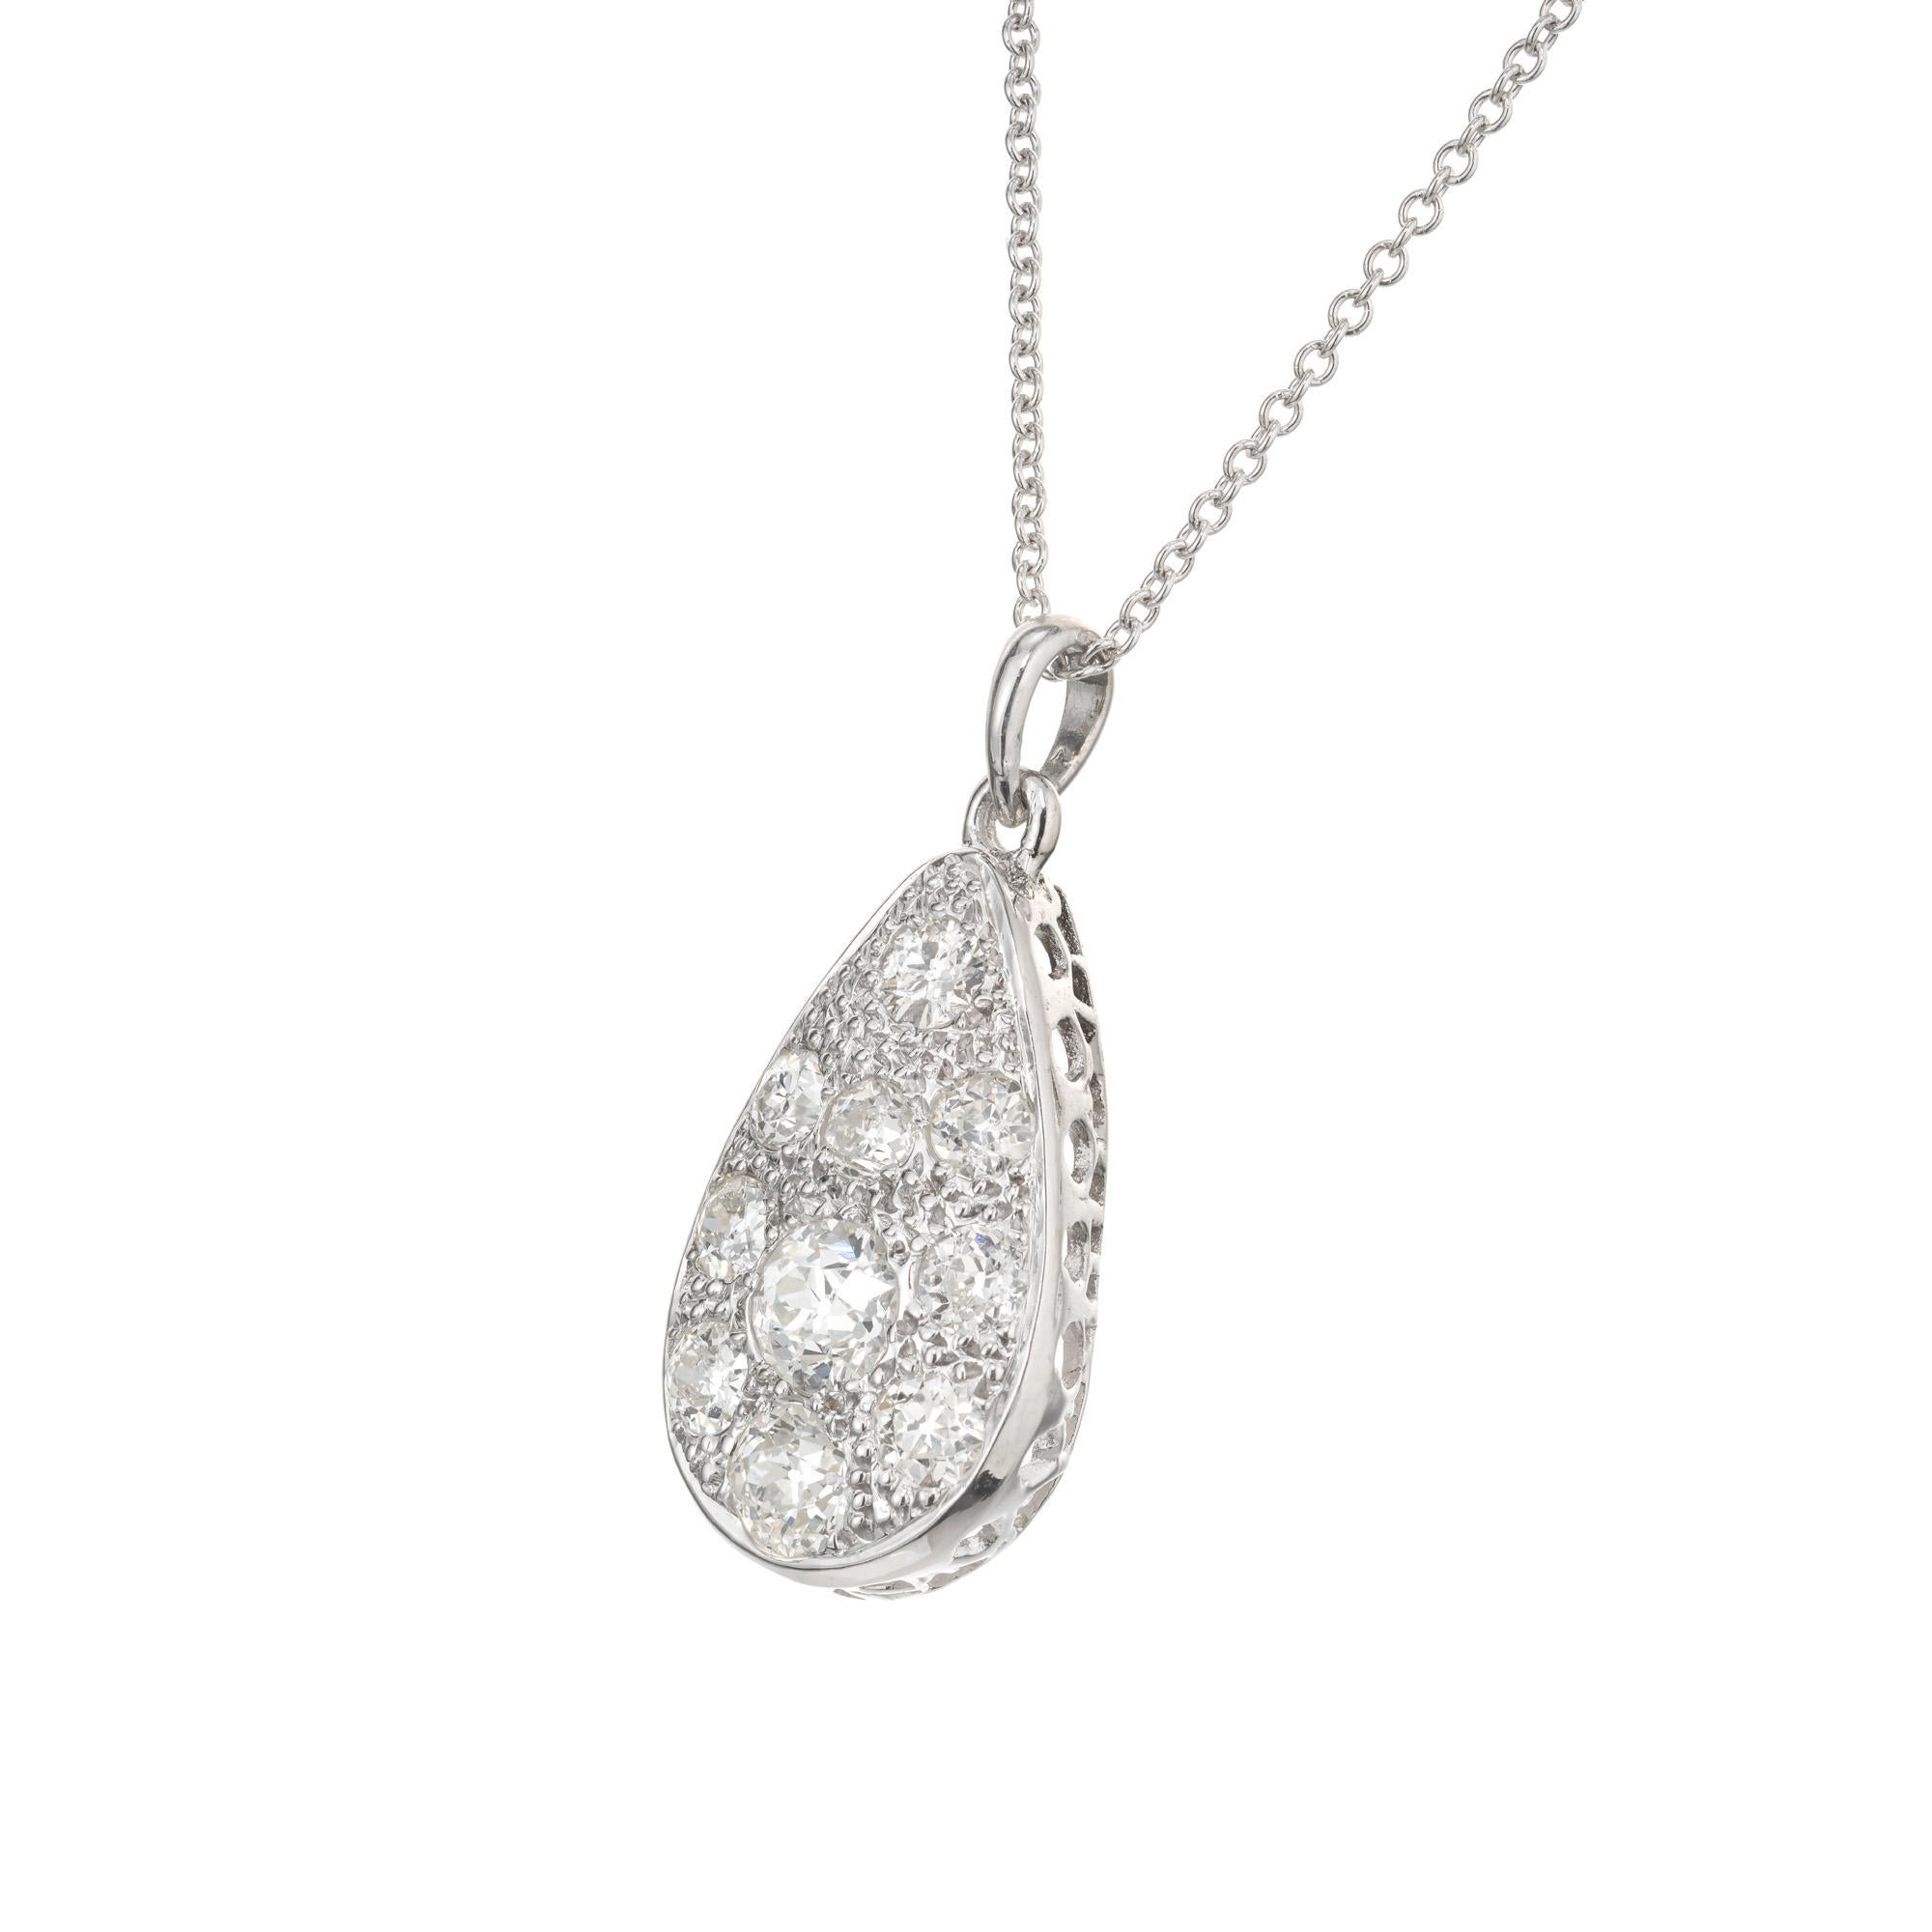 2.10 Carat Diamond White Gold Tear Drop Pendant Necklace  In Good Condition For Sale In Stamford, CT